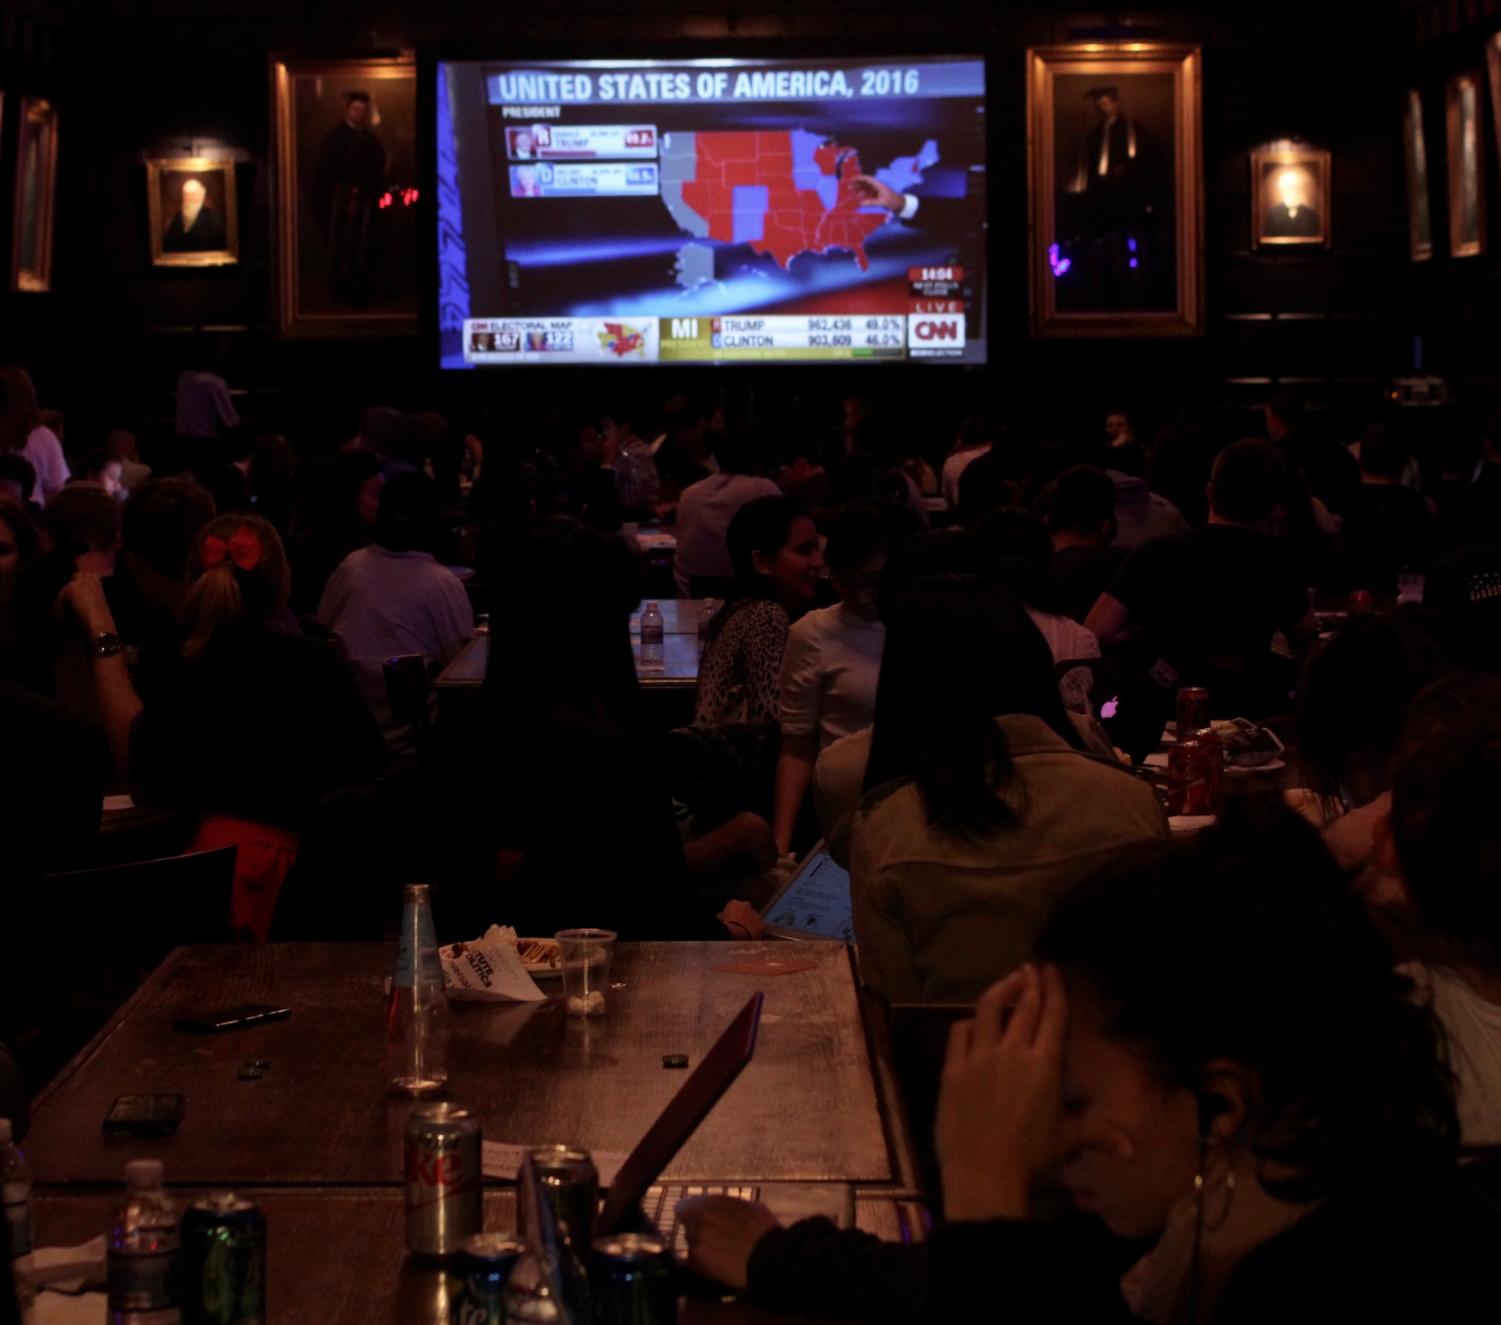 A woman leans her head in her hands at the Institute of Politics watch party.